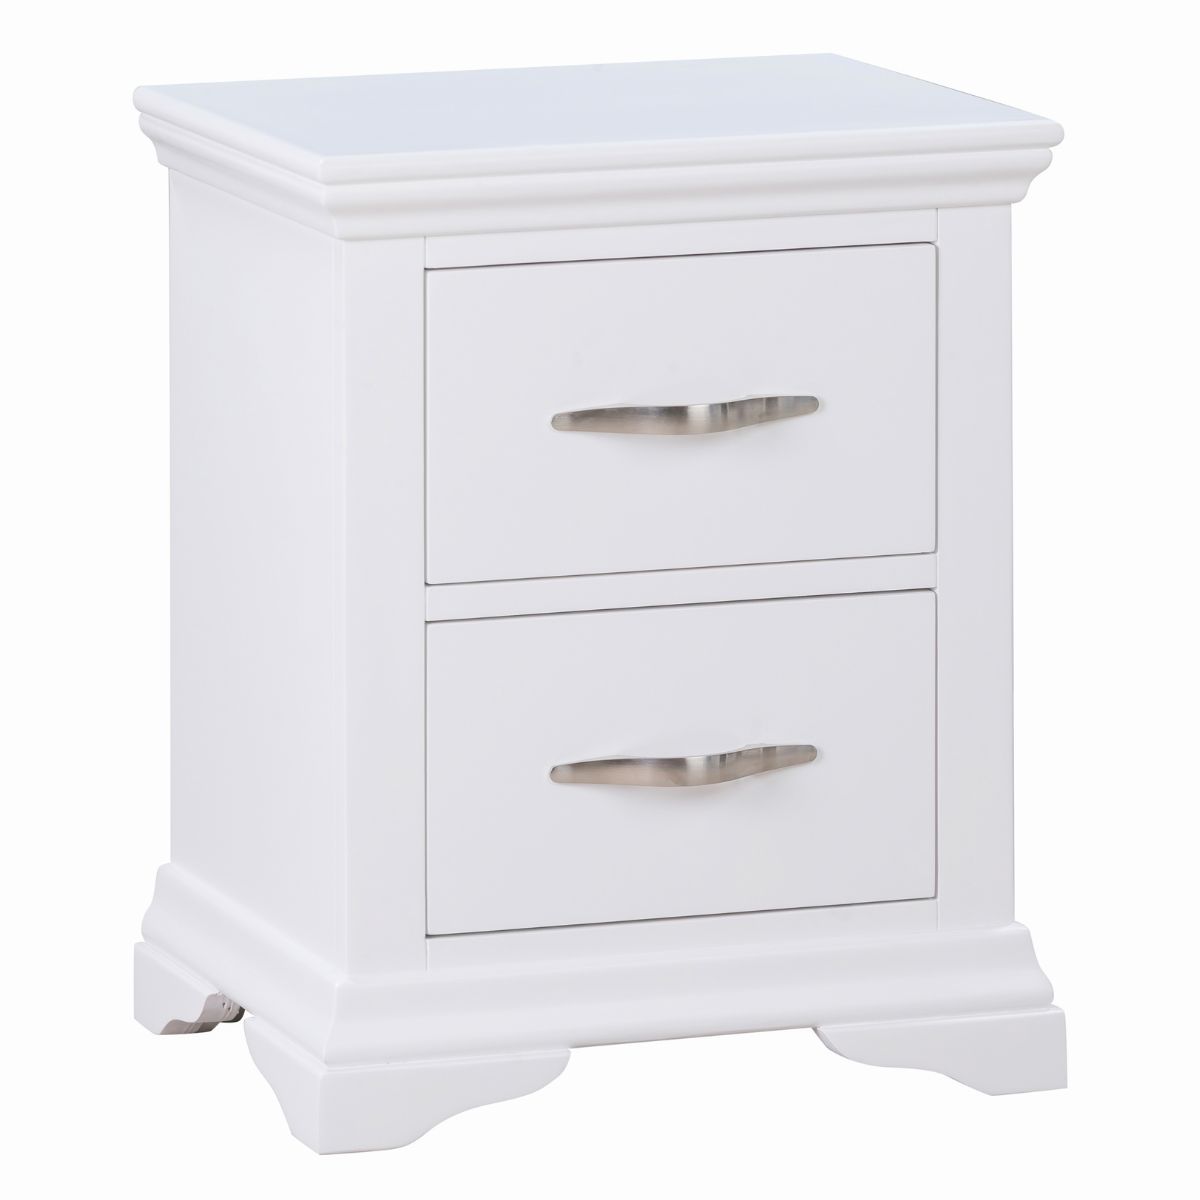 Lucilla White Wooden Bedside Table - 1